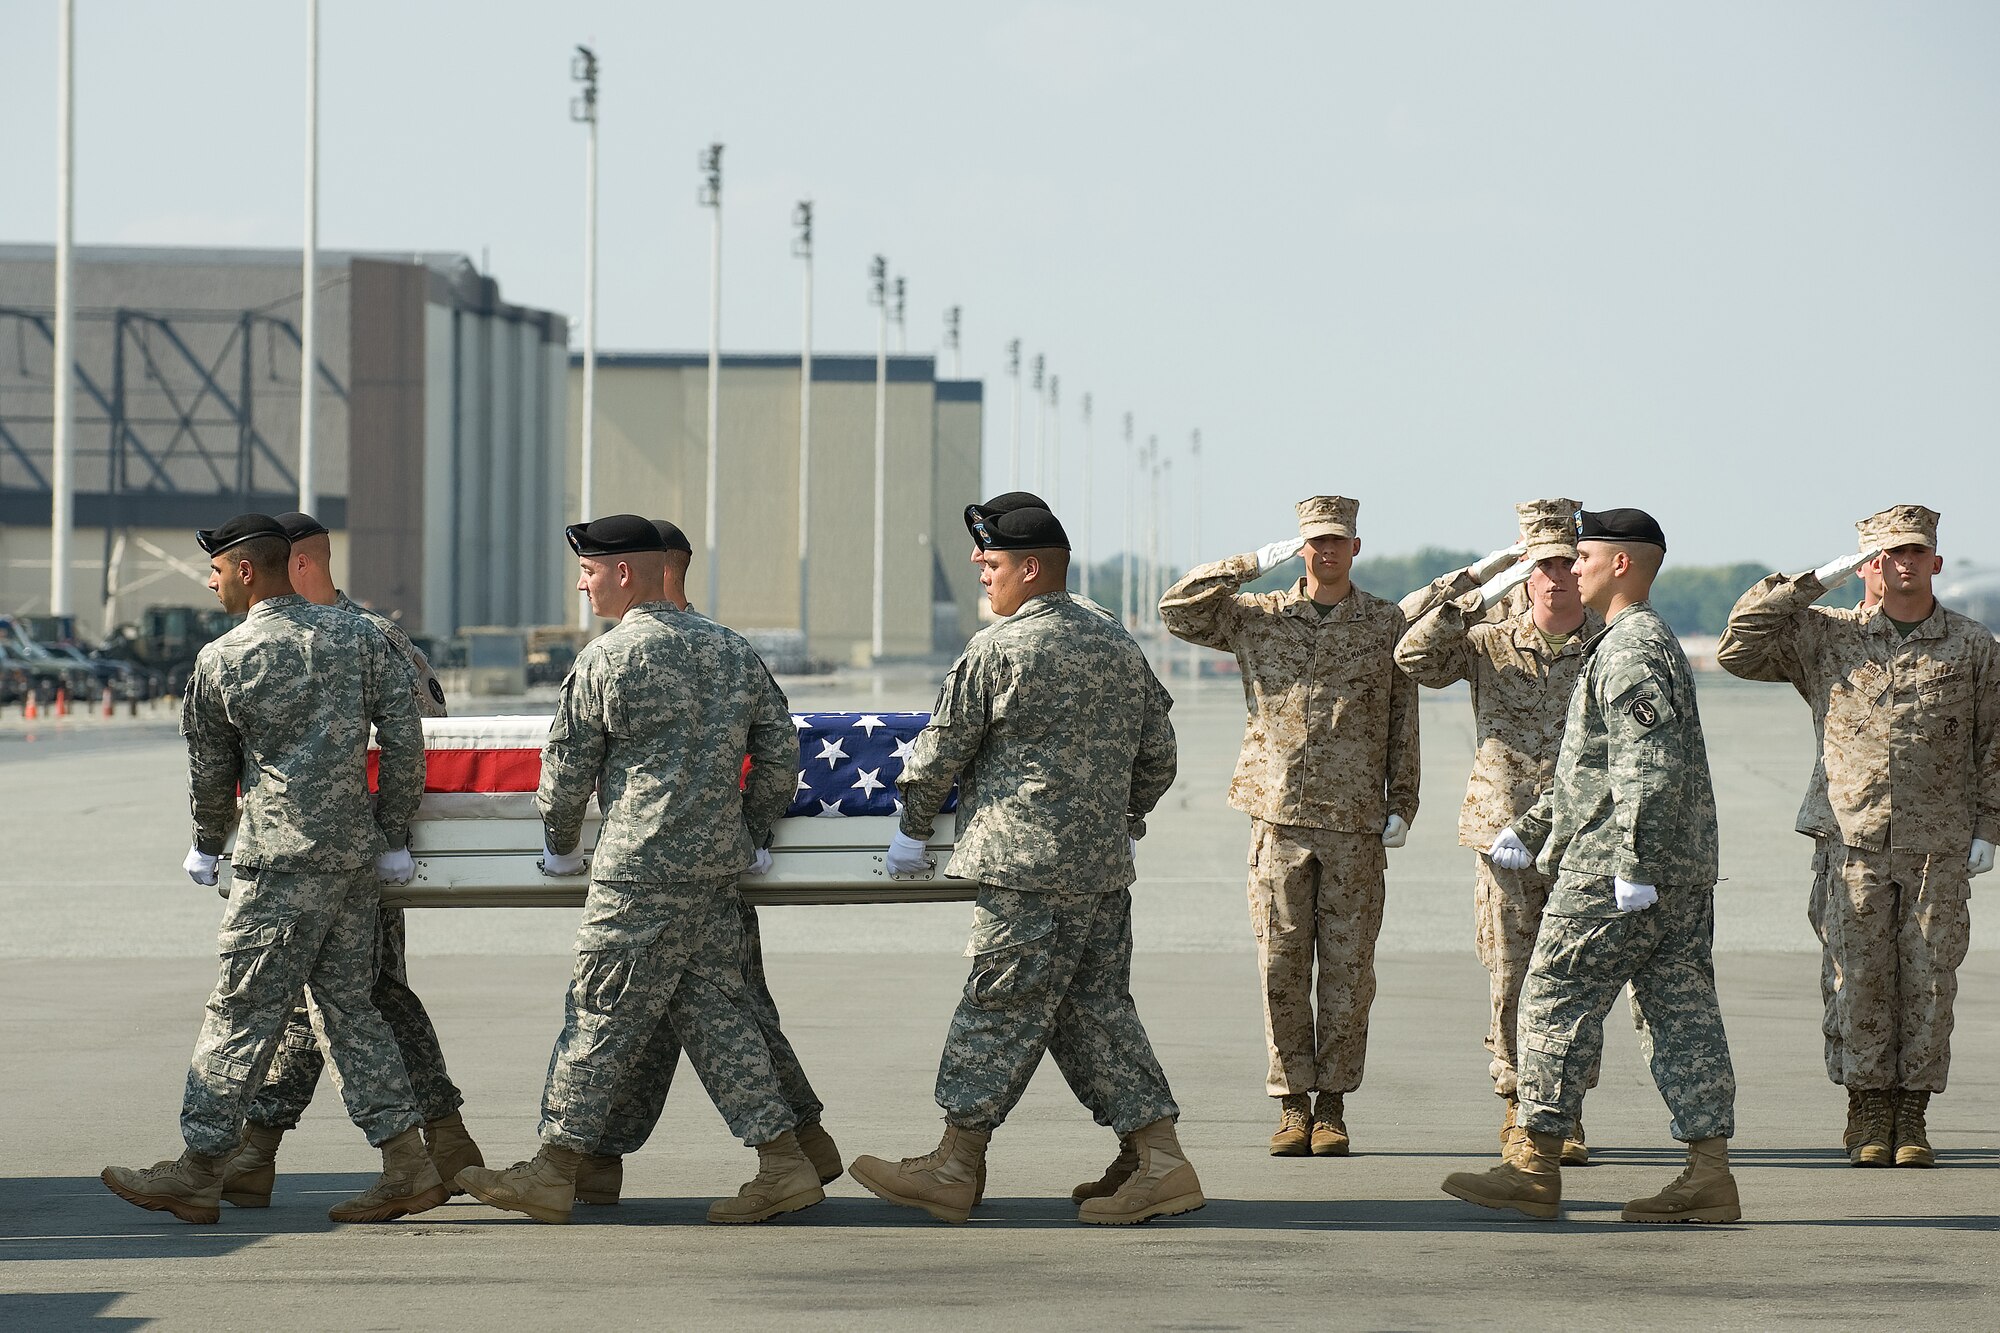 A U.S. Army carry team transfers the remains of Army Pfc. Gebrah P. Noonan of Watertown, Conn., at Dover Air Force Base, Del., Sept. 25, 2010.  Noonan was assigned to 3rd Battalion, 15th Infantry Regiment, 4th Brigade Combat Team, 3rd Infantry Division, Fort Stewart, Ga. (U.S. Air Force photo/Jason Minto)